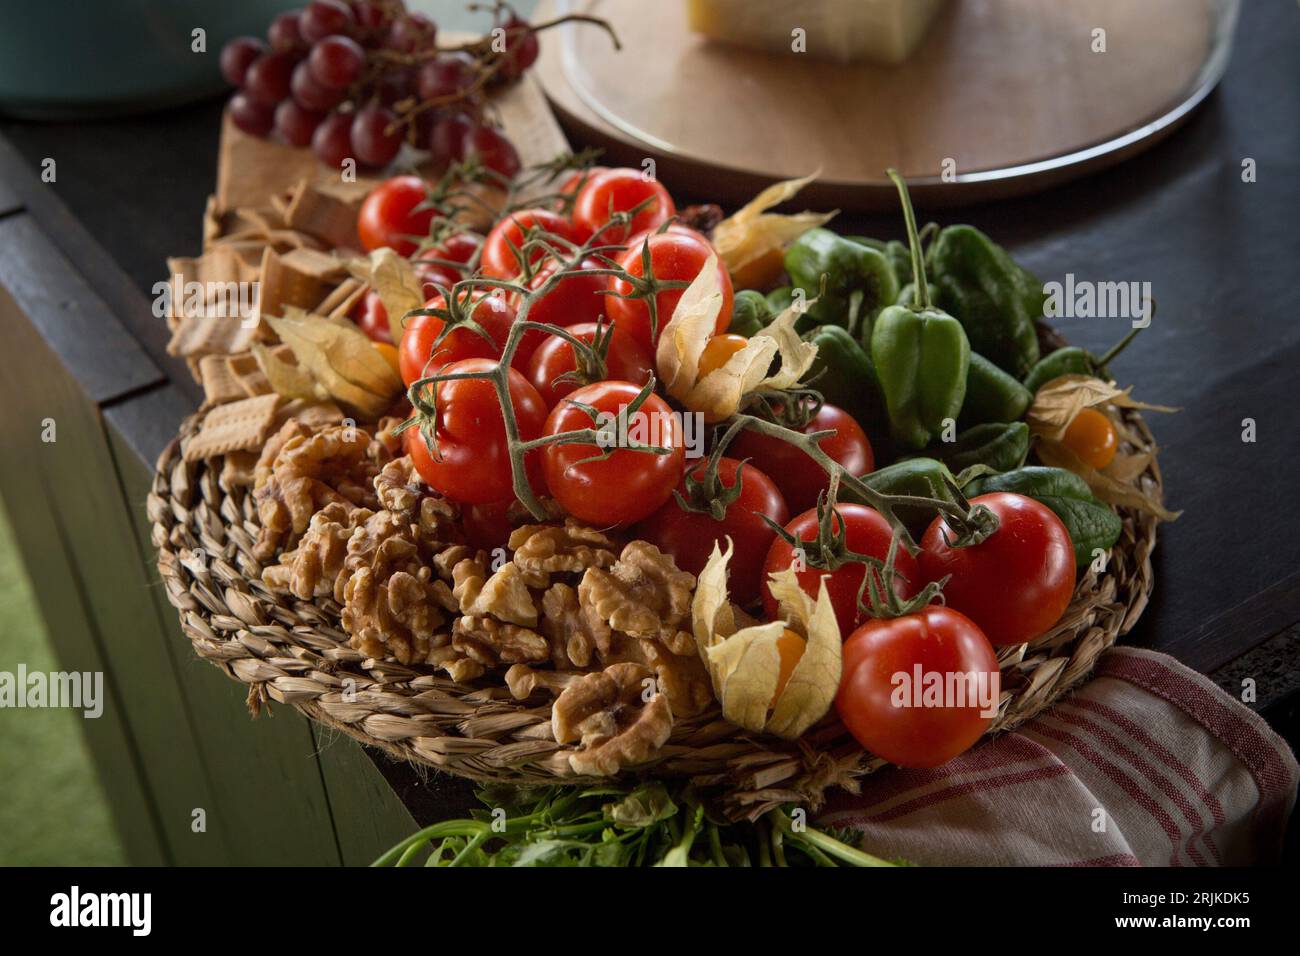 Table composition for cheese display over cattail trivet. Selective focus. Stock Photo